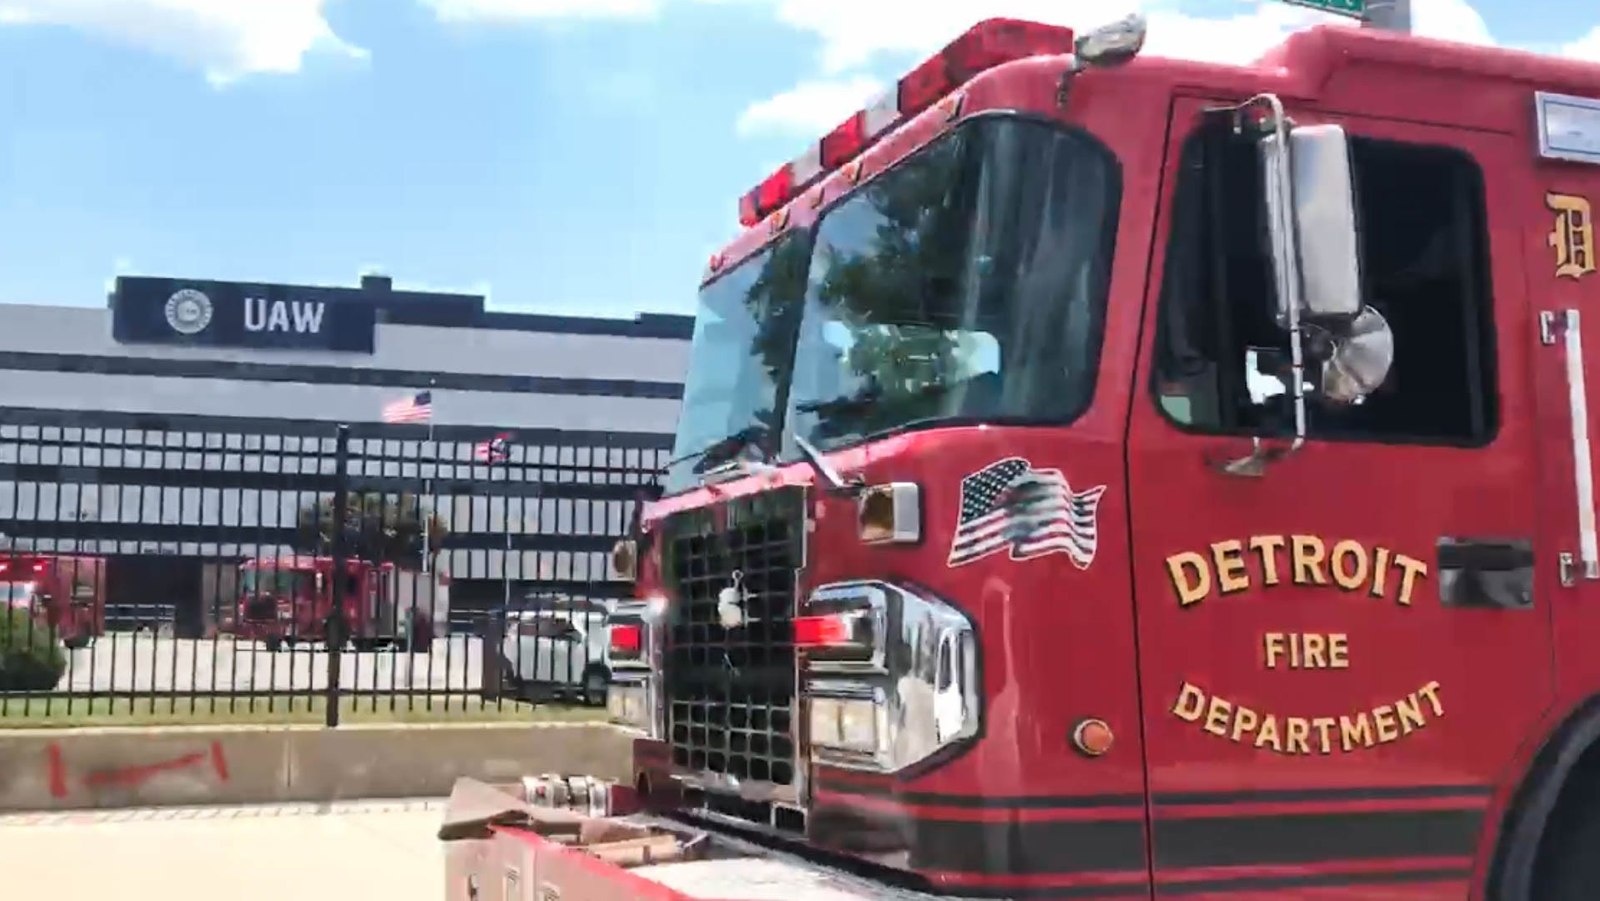 Fire engine crash injures 4 Detroit firefighters, 2 others